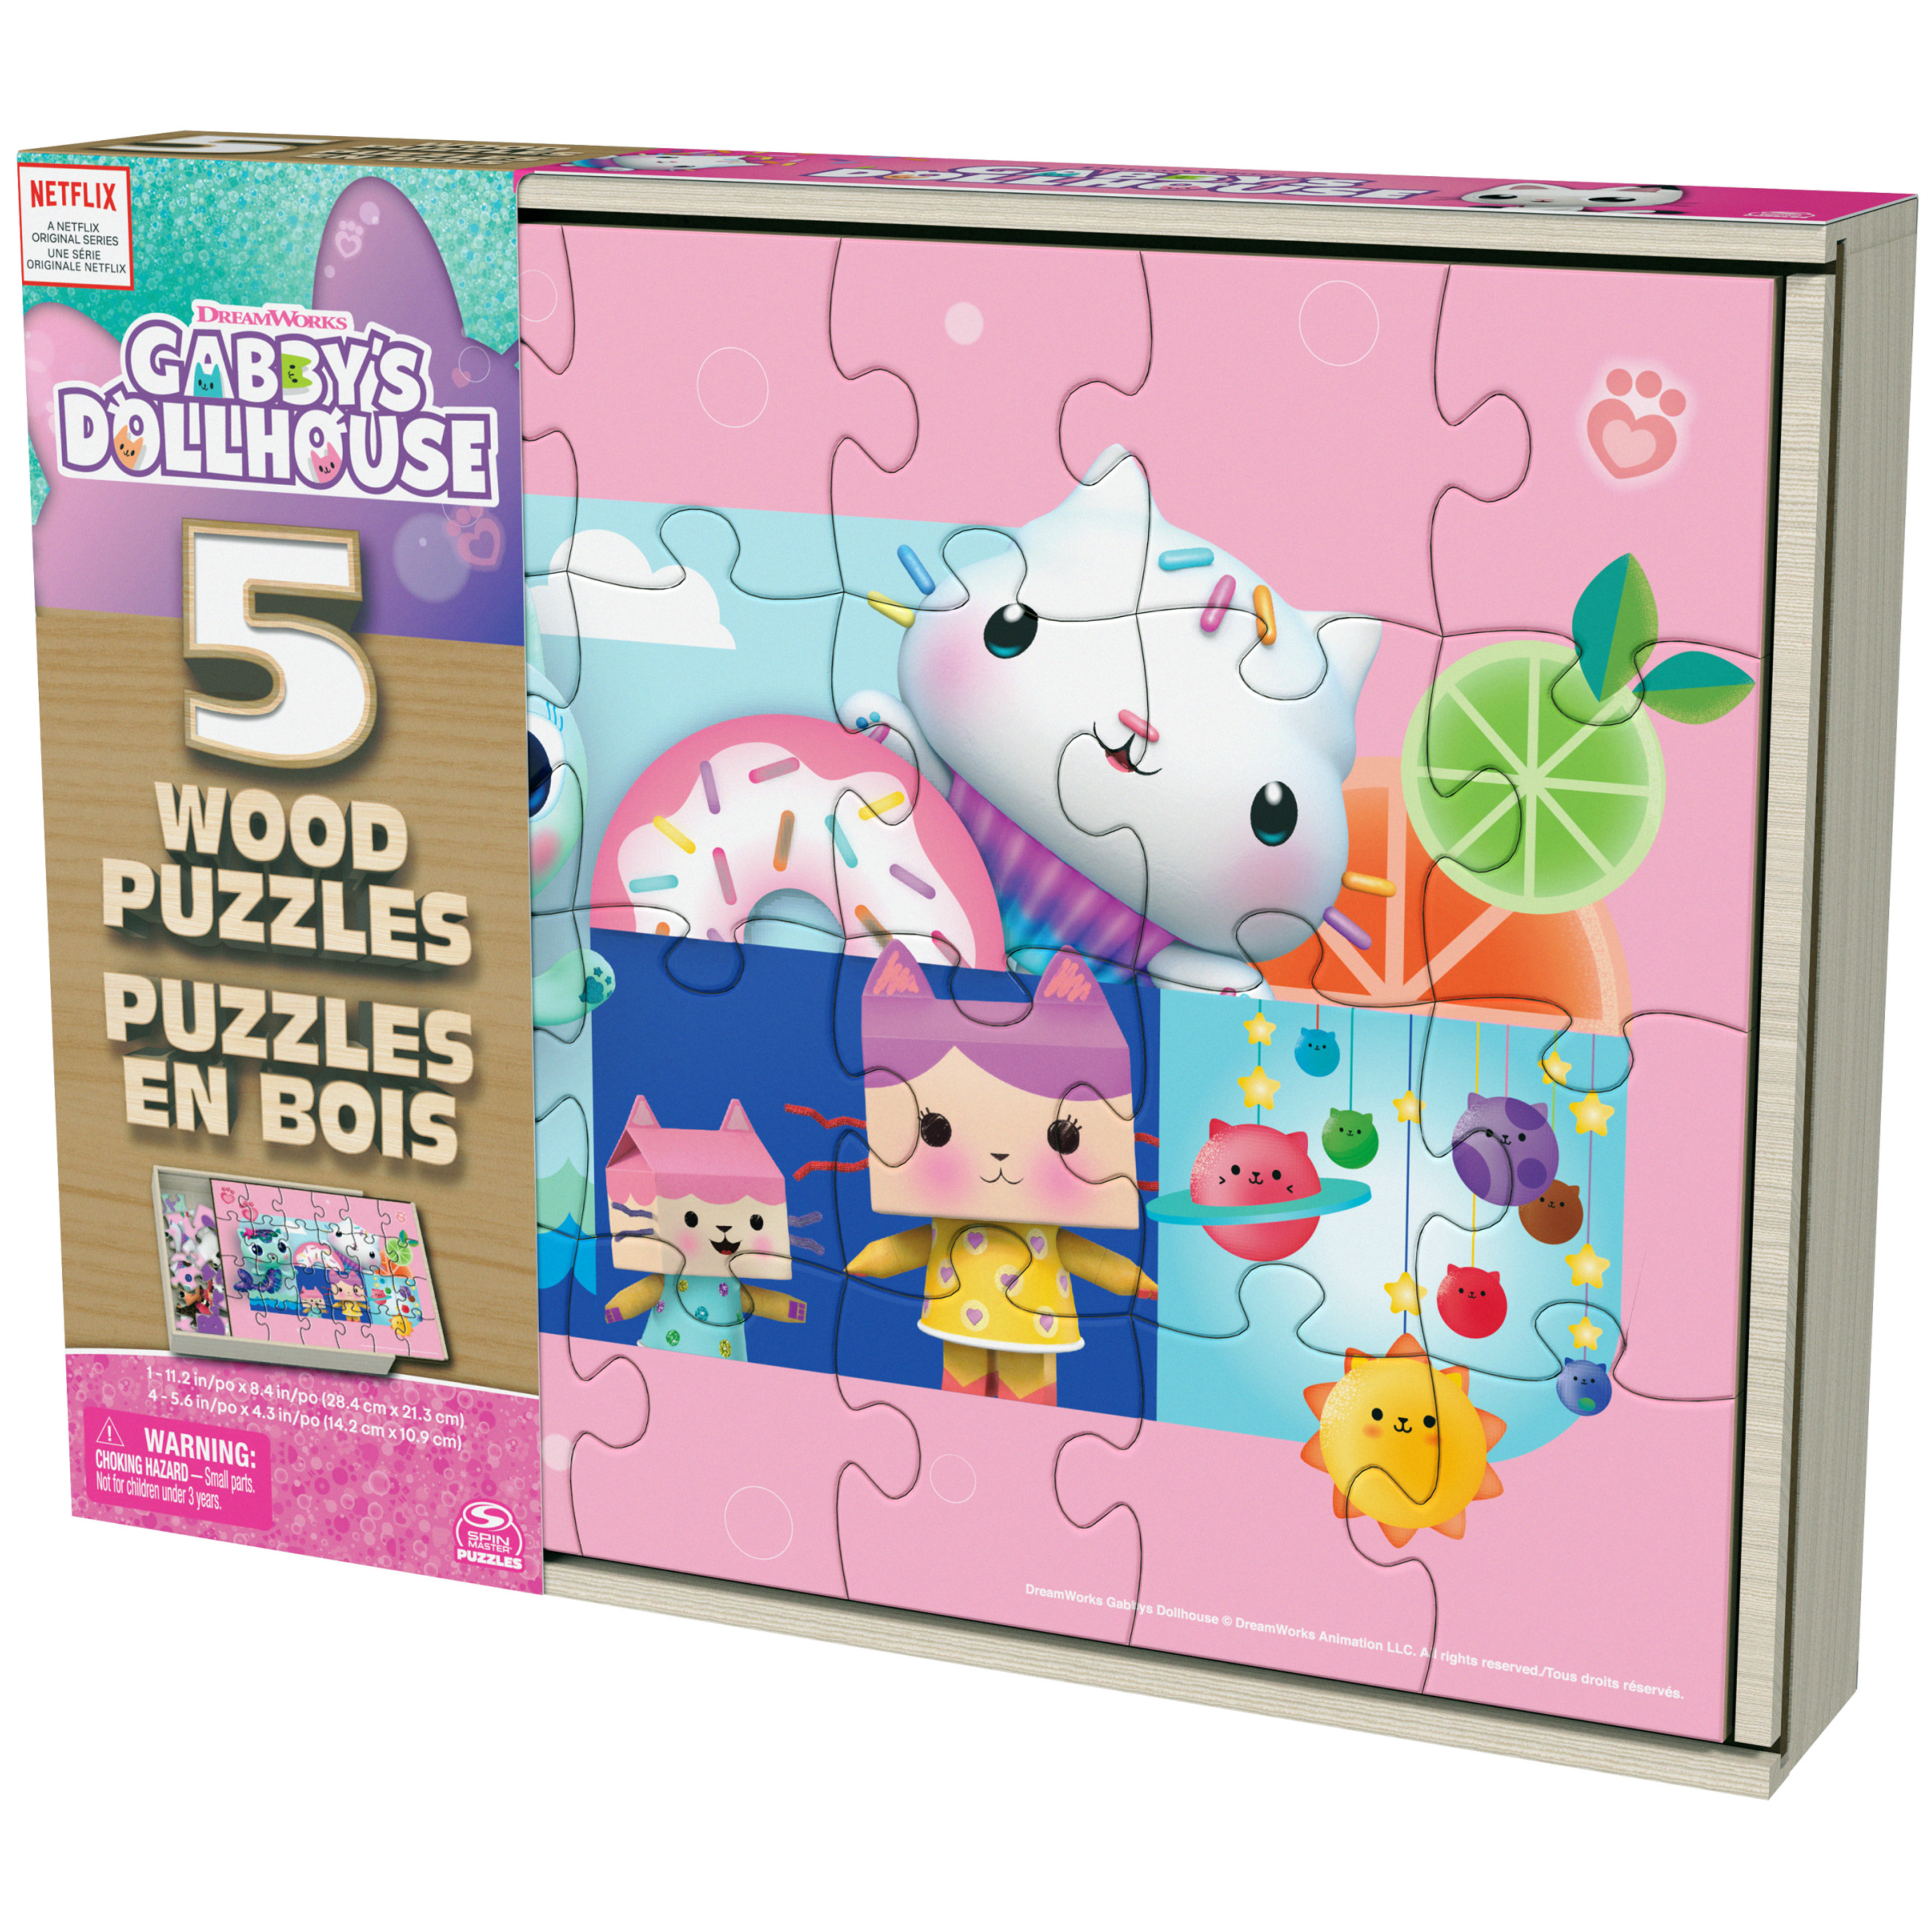 Gabby’s Dollhouse, 5 Wood Puzzles with Storage Box, for Kids Ages 4 and up - image 5 of 7